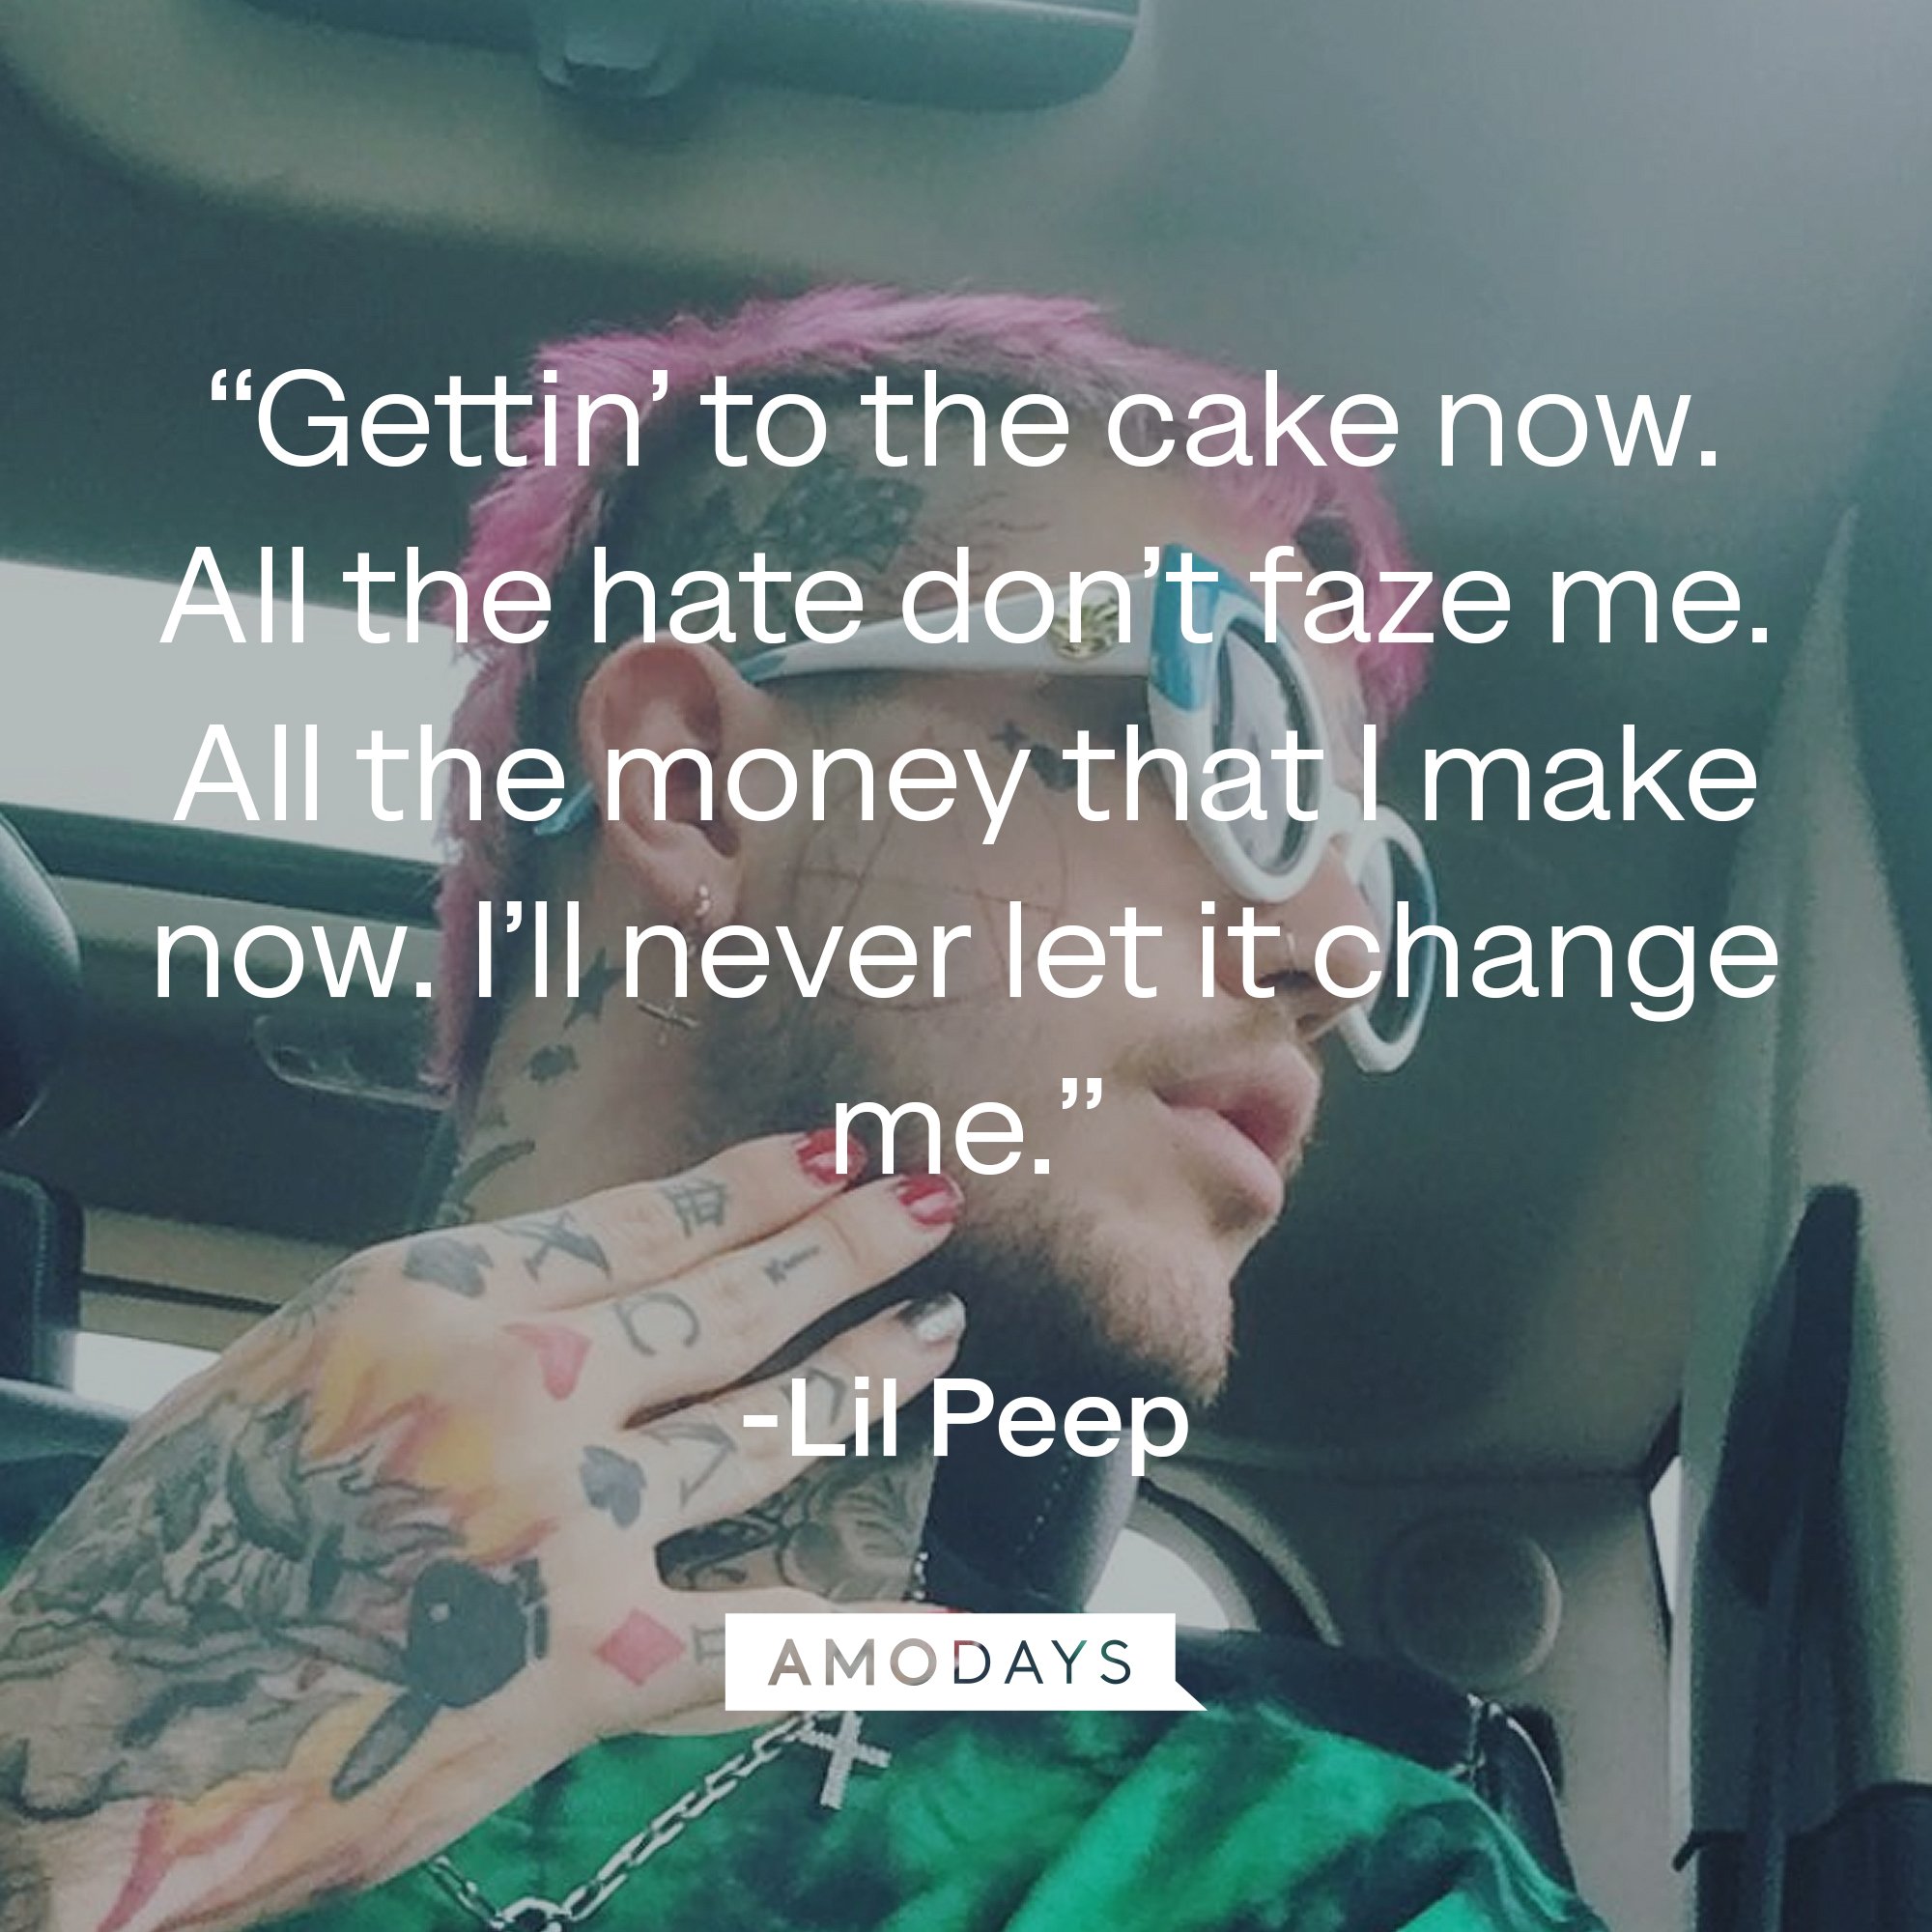 Lil Peep's quote: “Gettin’ to the cake now. All the hate don’t faze me. All the money that I make now. I’ll never let it change me.” | Image: AmoDays